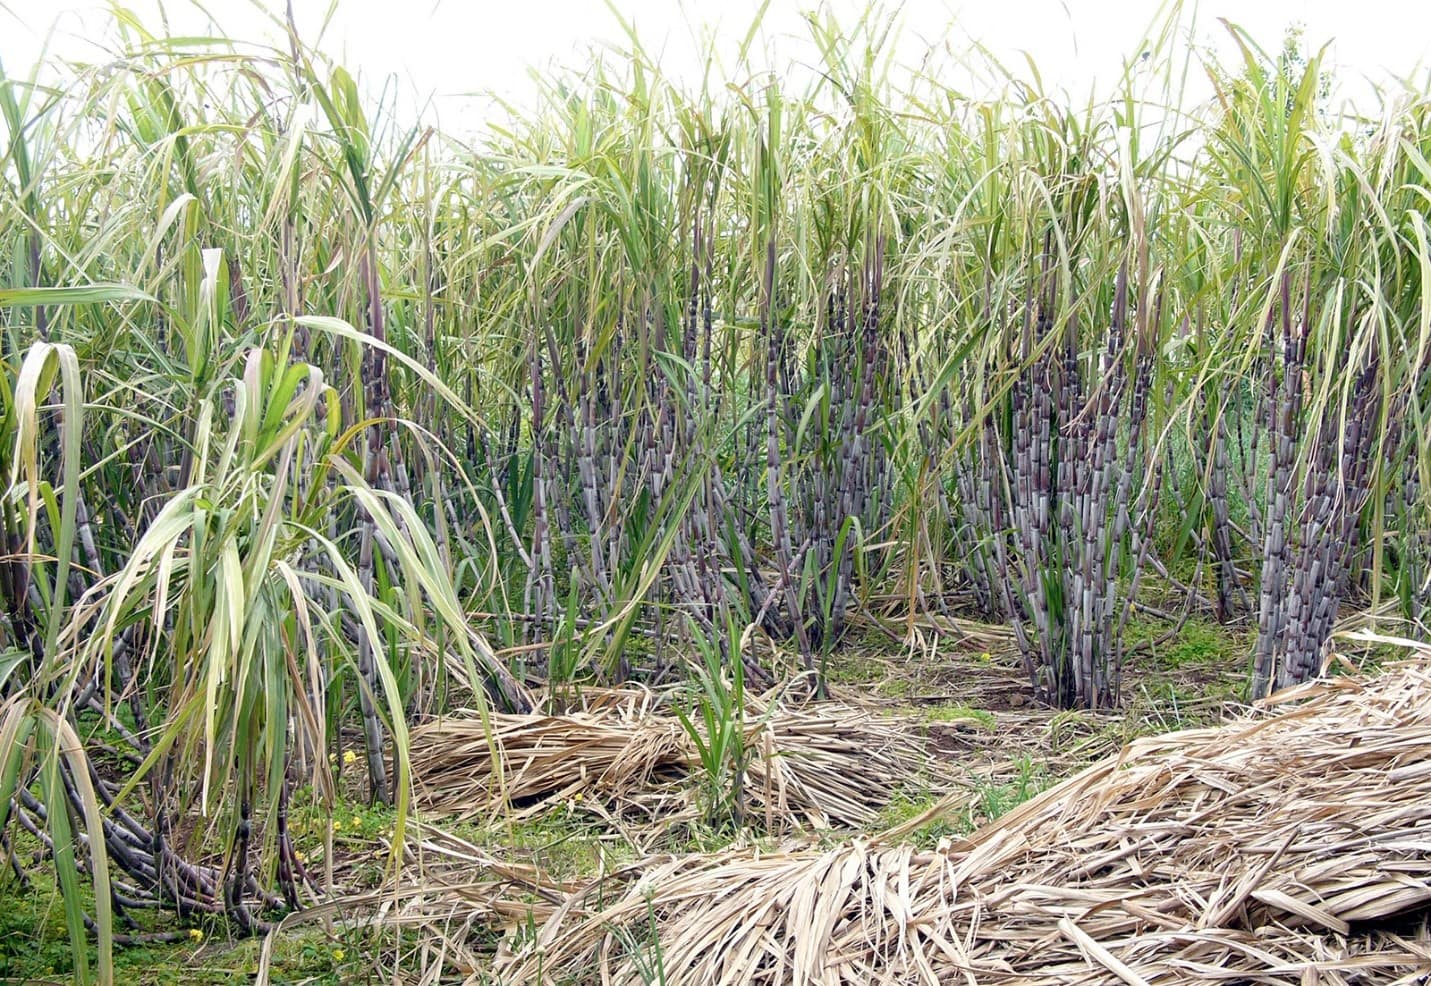 cheap-sugar-imports-hurting-local-millers-say-western-leaders